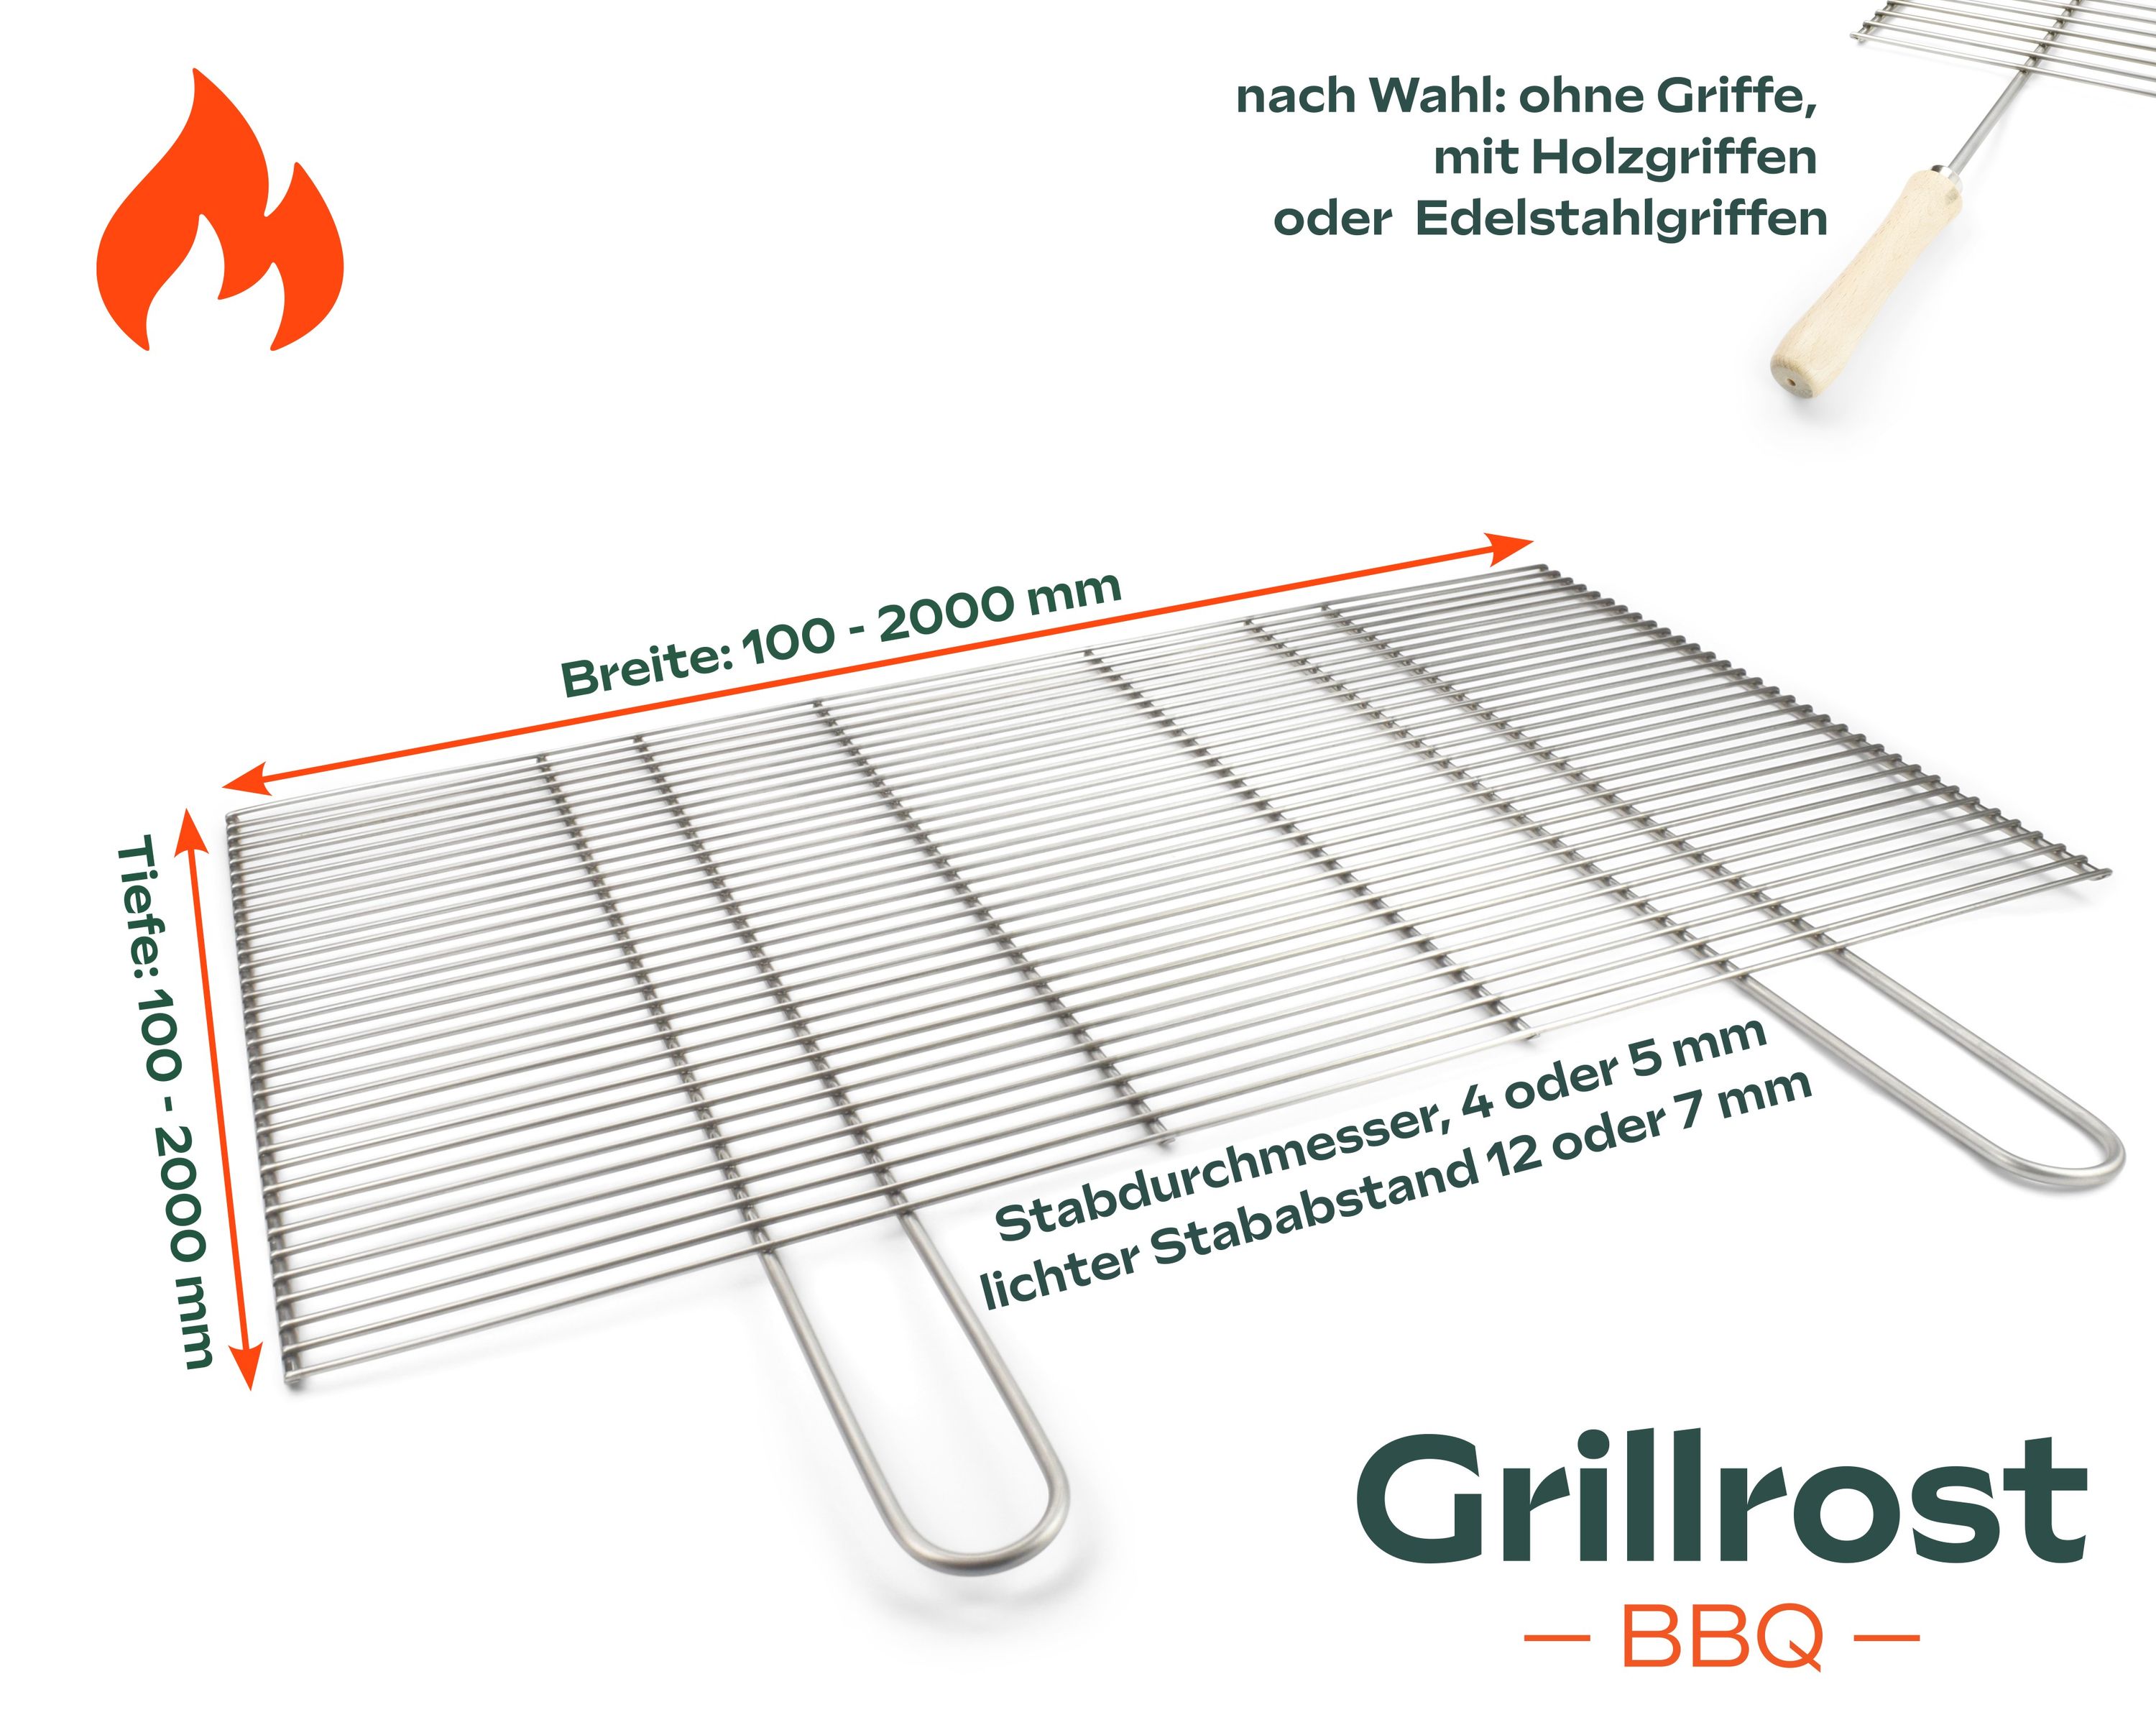 Barbecue grill made to measure ECKIG KLASSIK model in stainless steel